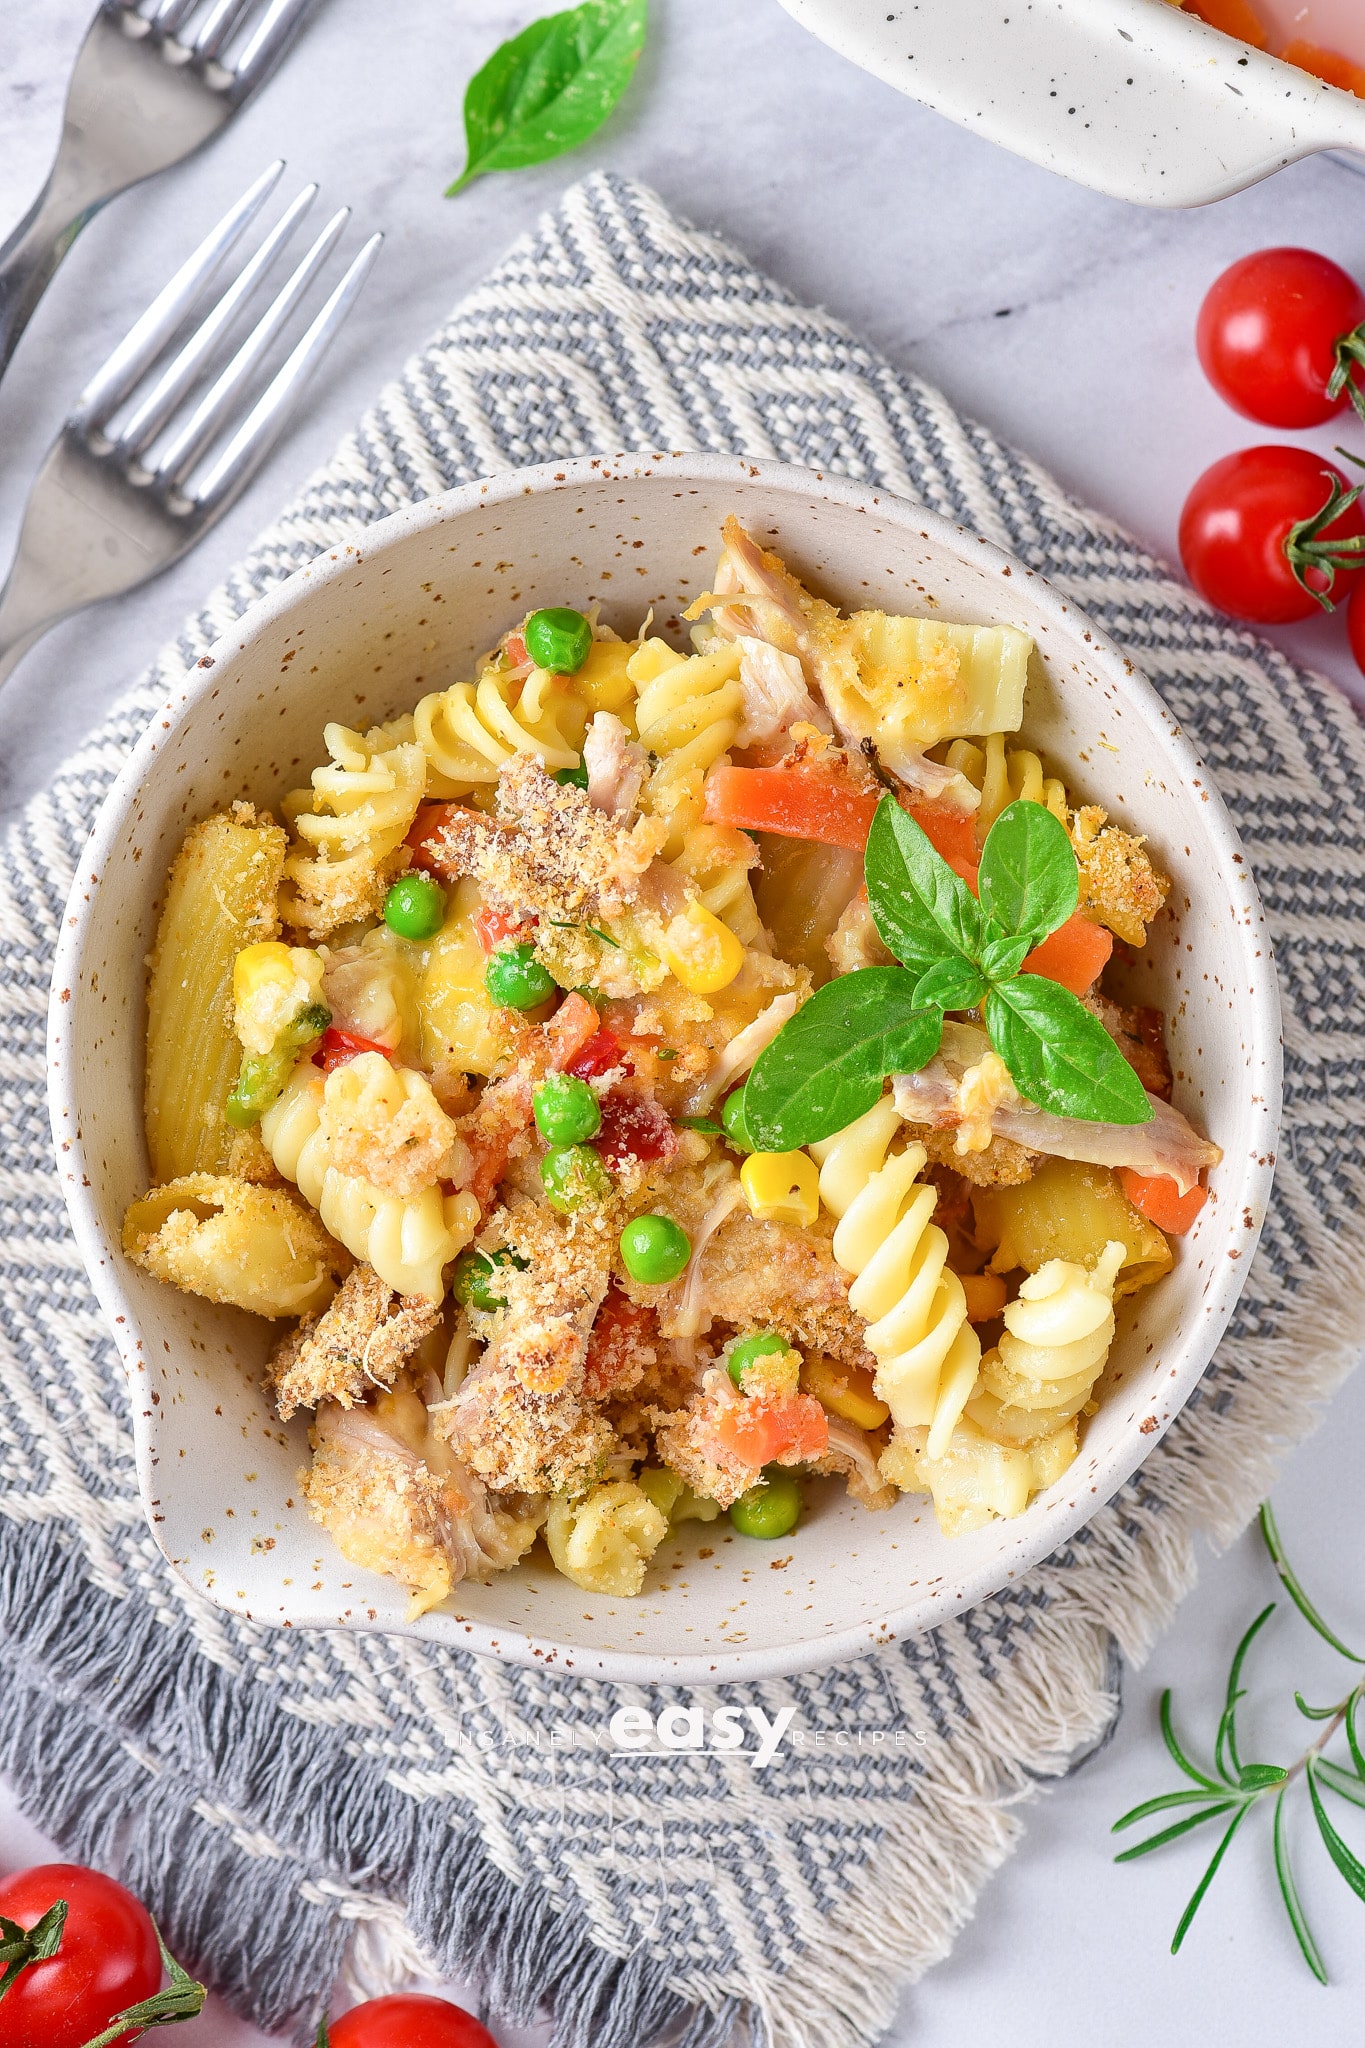 leftover turkey pasta bake in a white bowl and also in a white baking dish. You can see turkey chunks, tomatoes, basil and other veggies in the bake. Then to the back left aretwo forks and there are cherry tomatoes sprinkled around the dish.